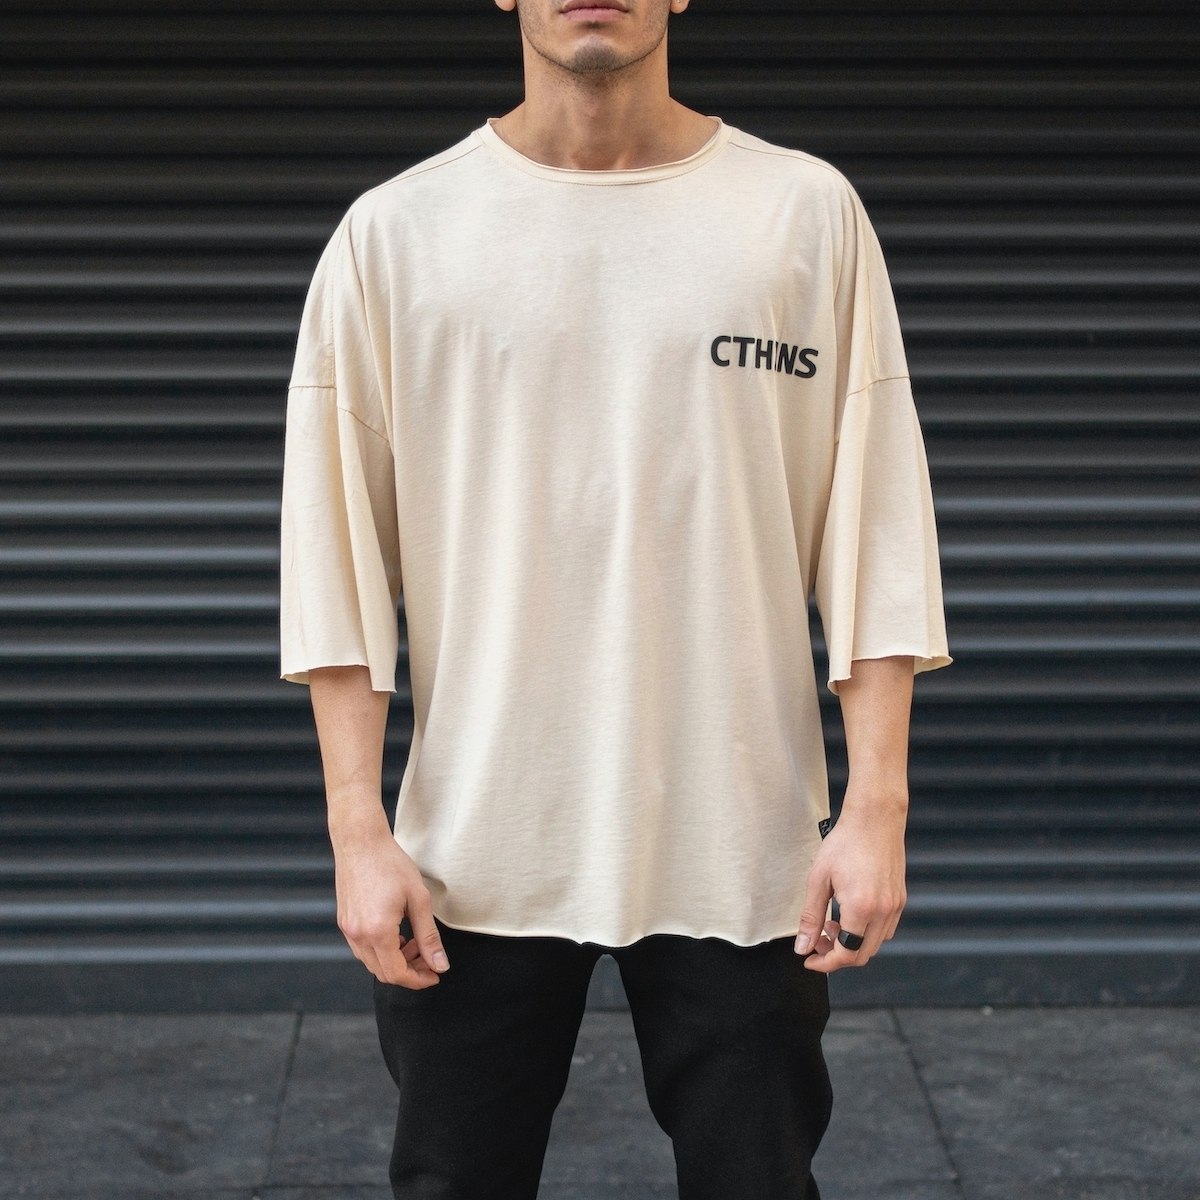 Men's Oversize T-Shirt Ripped Neck Text Printed Beige - 1